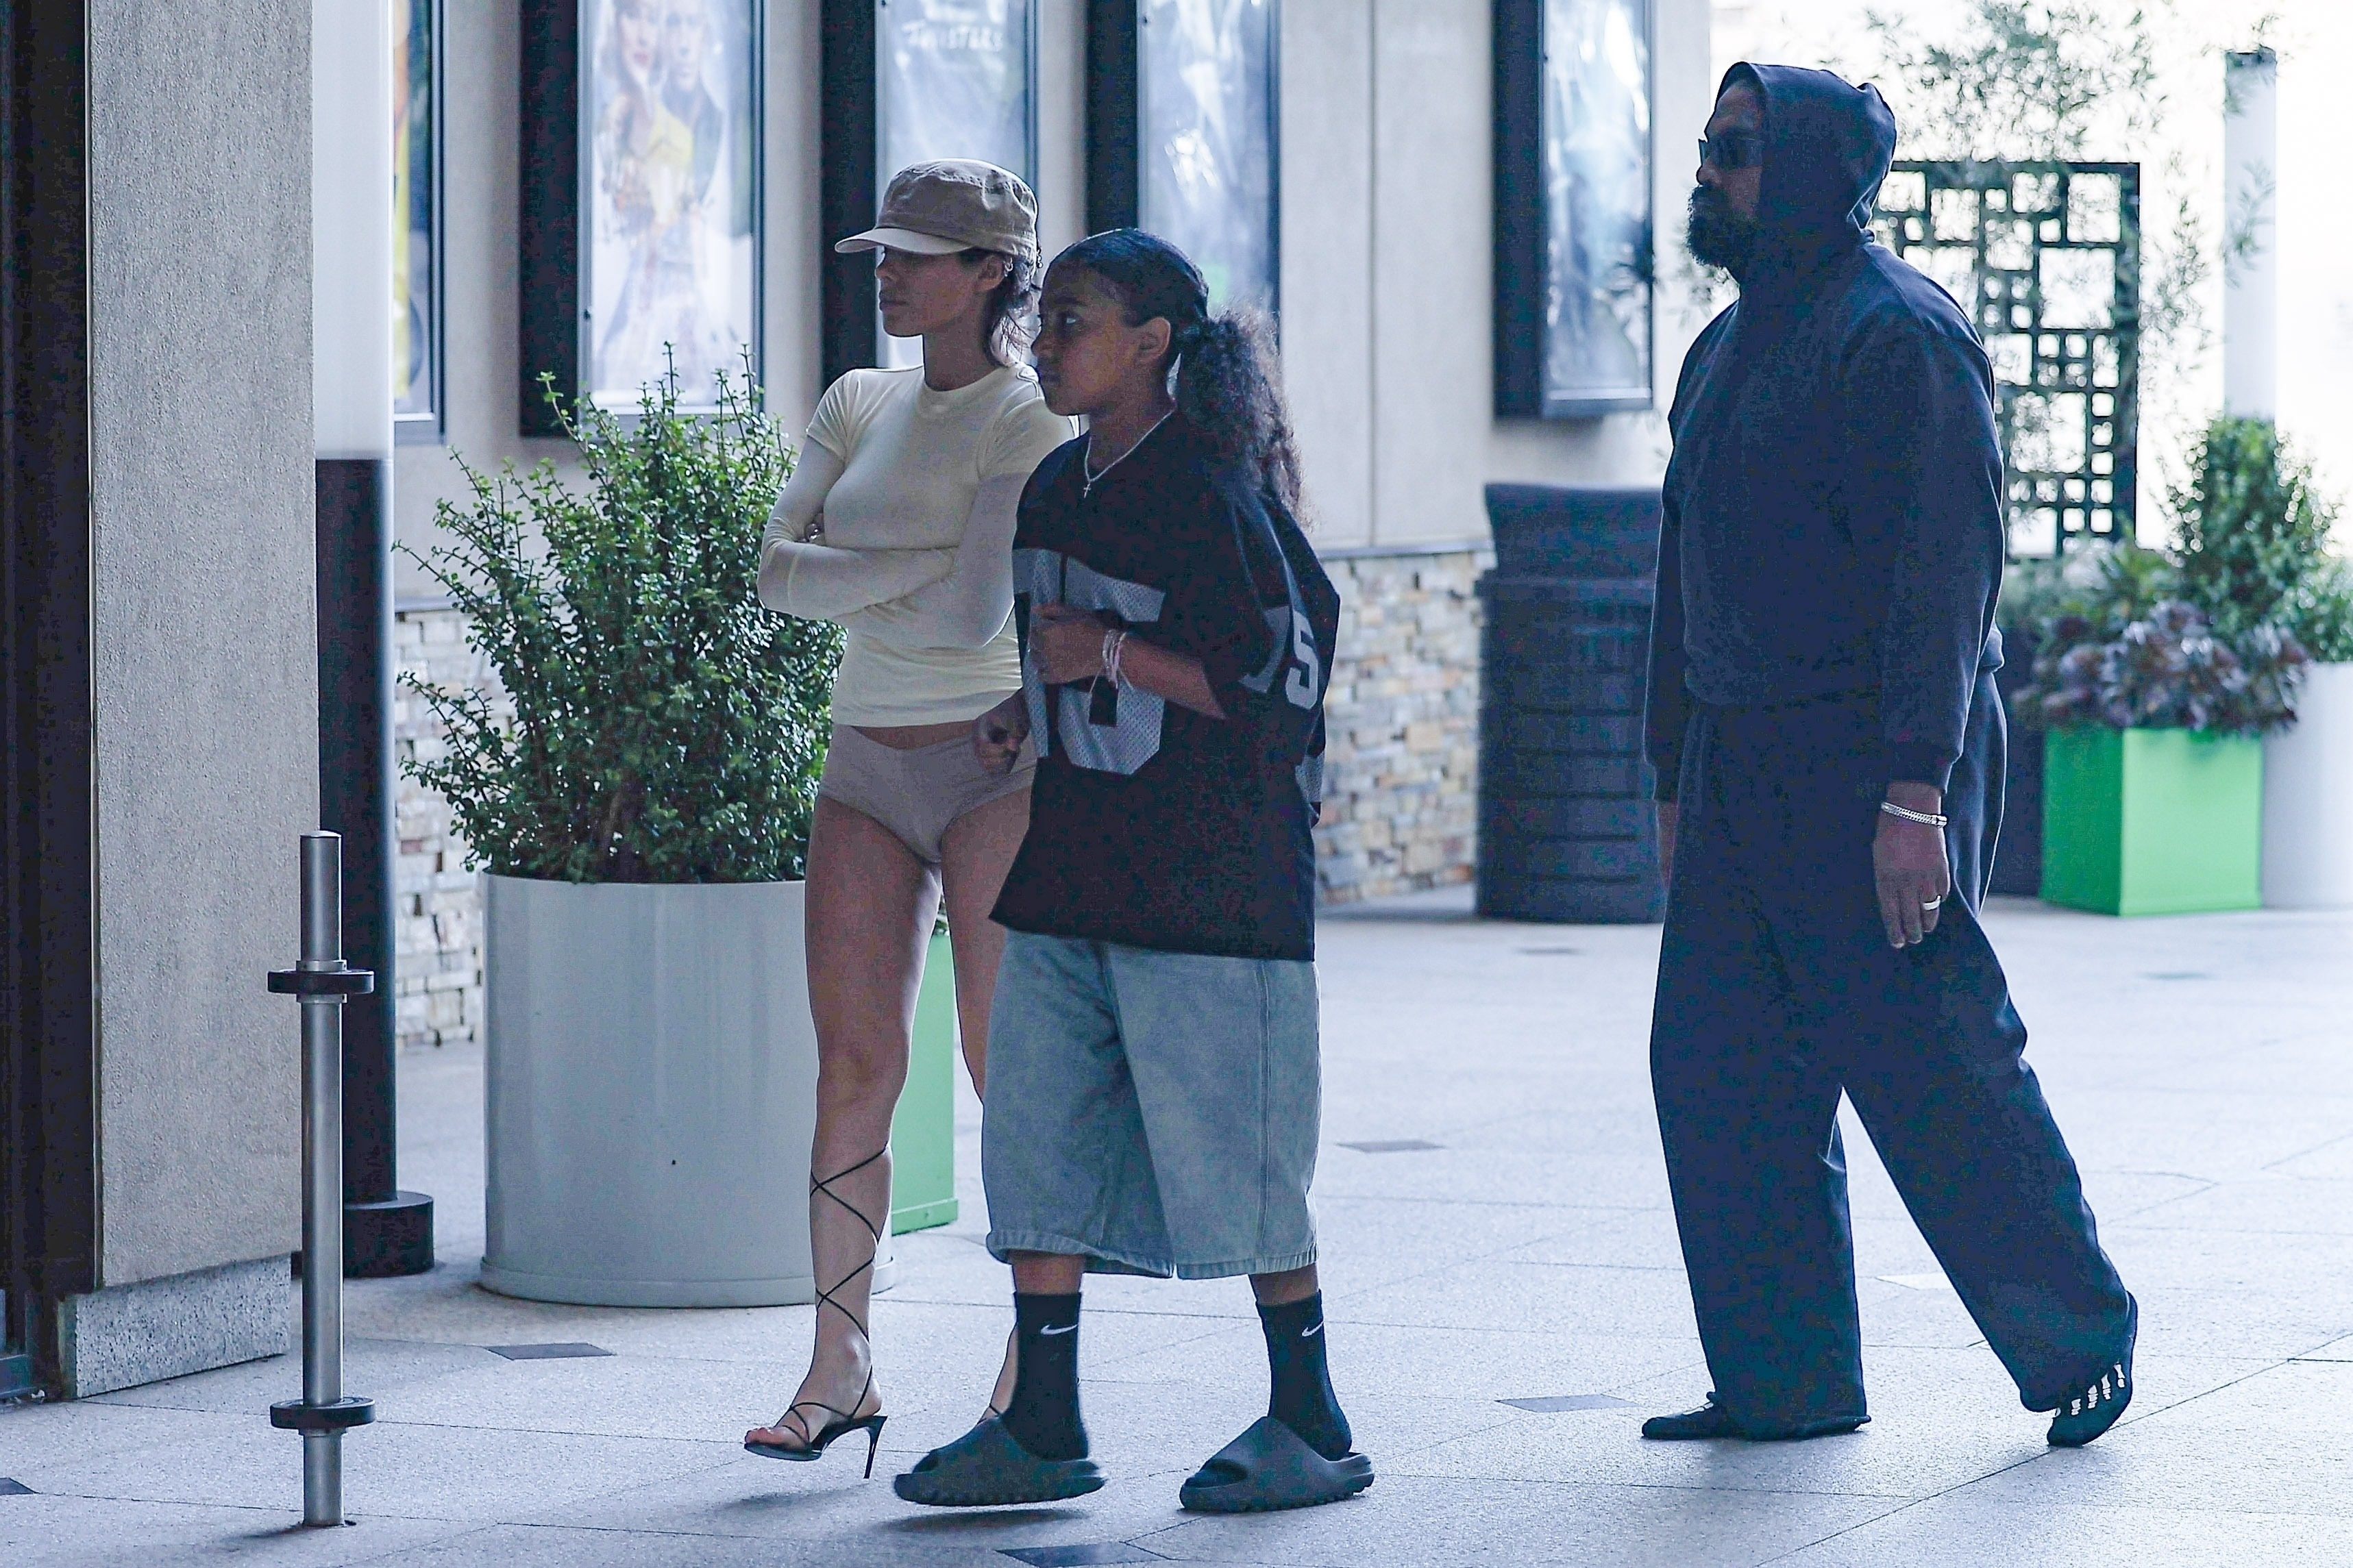 Bianca Censori, North West, and Kanye West heading into a movie theater to see Deadpool & Wolverine on Saturday in Los Angeles, California